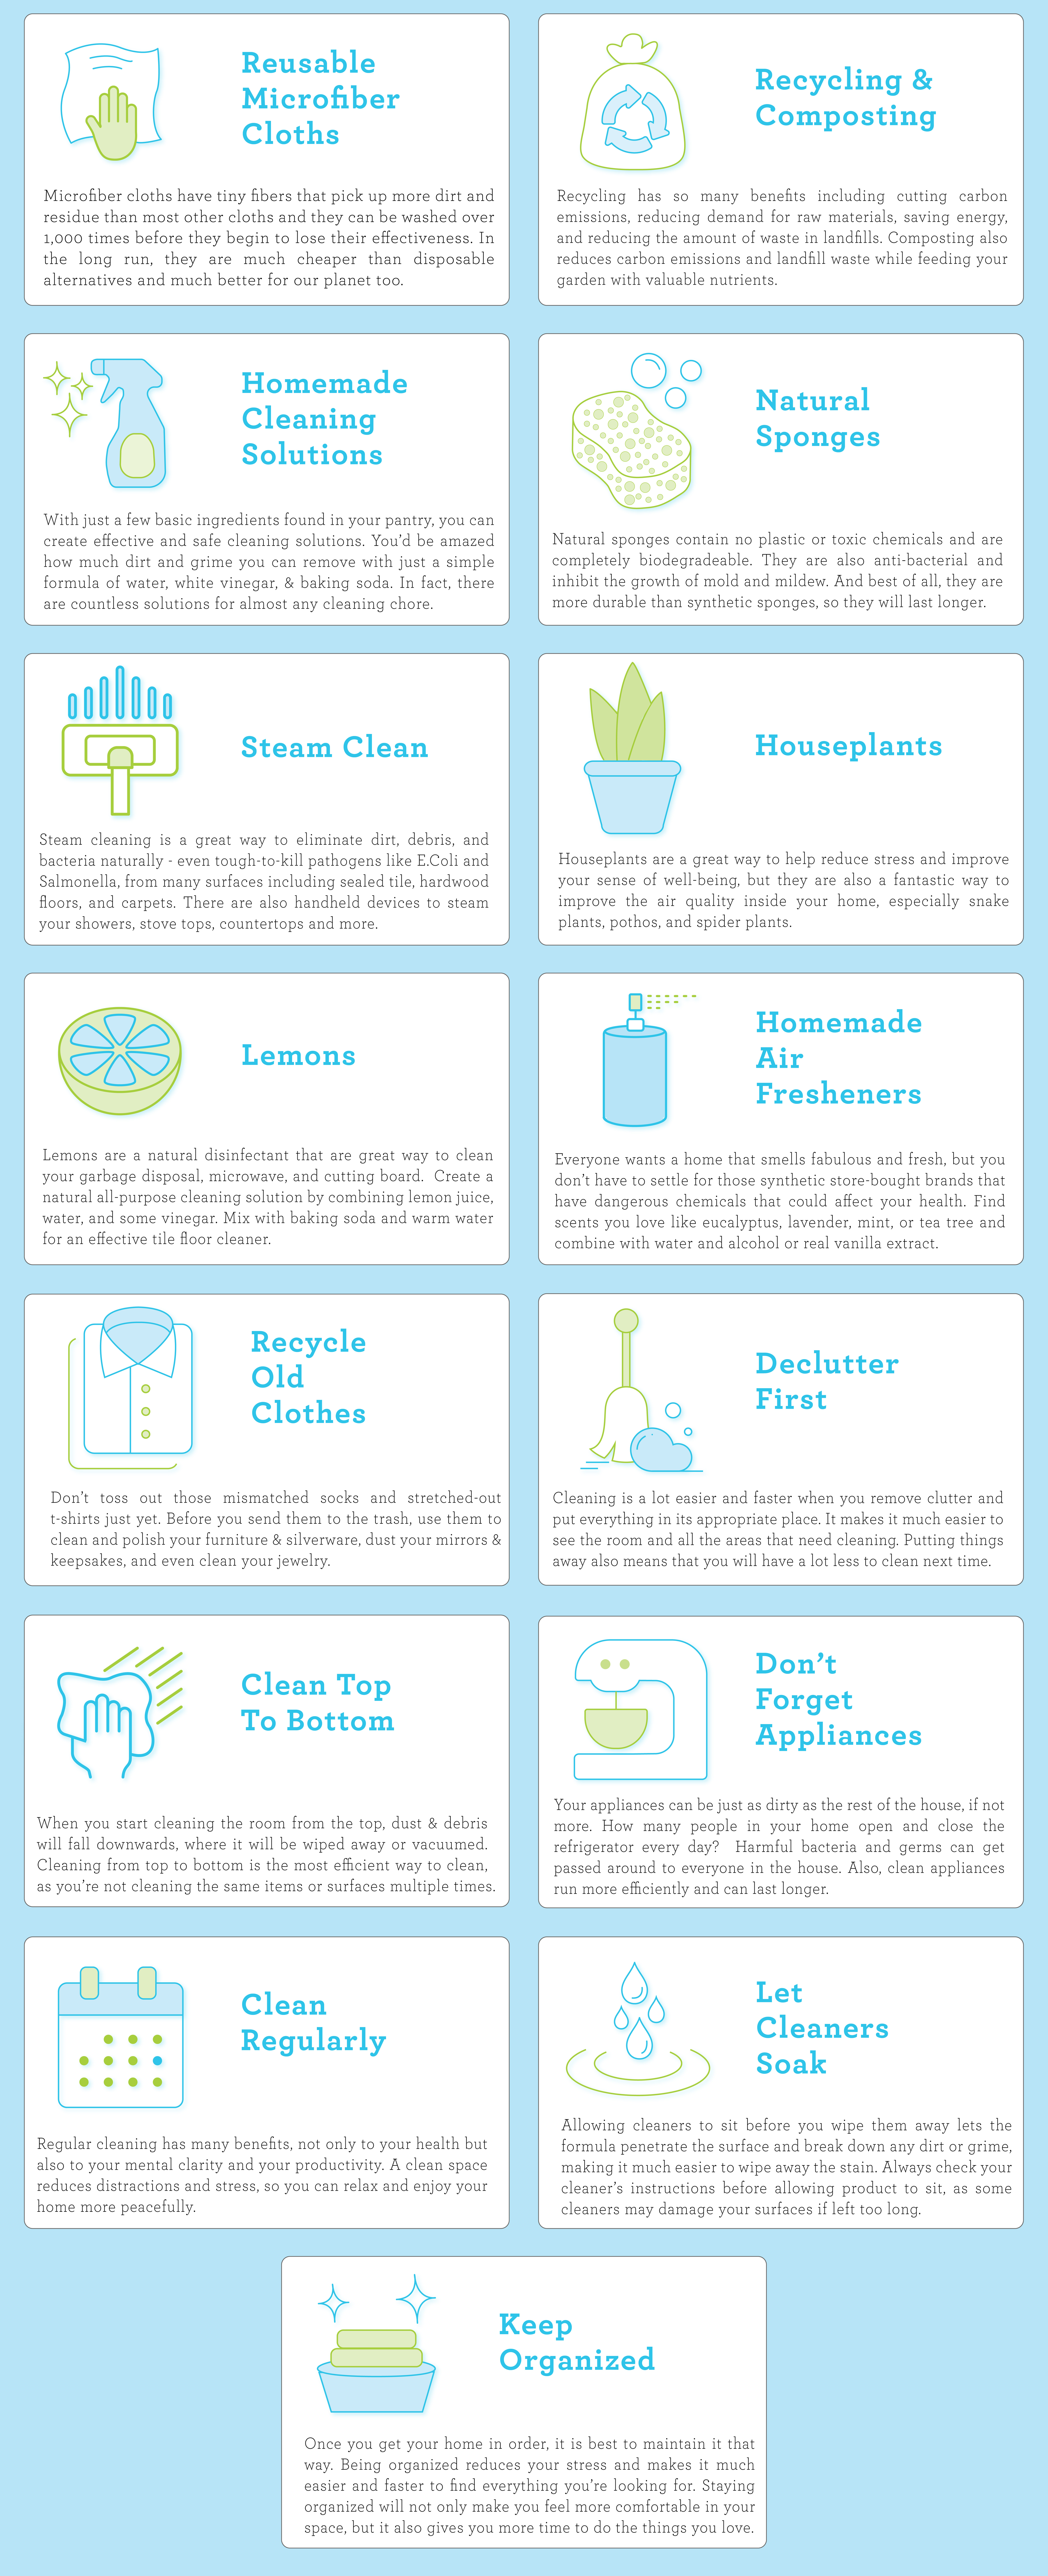 cleaning tips from ecomaids